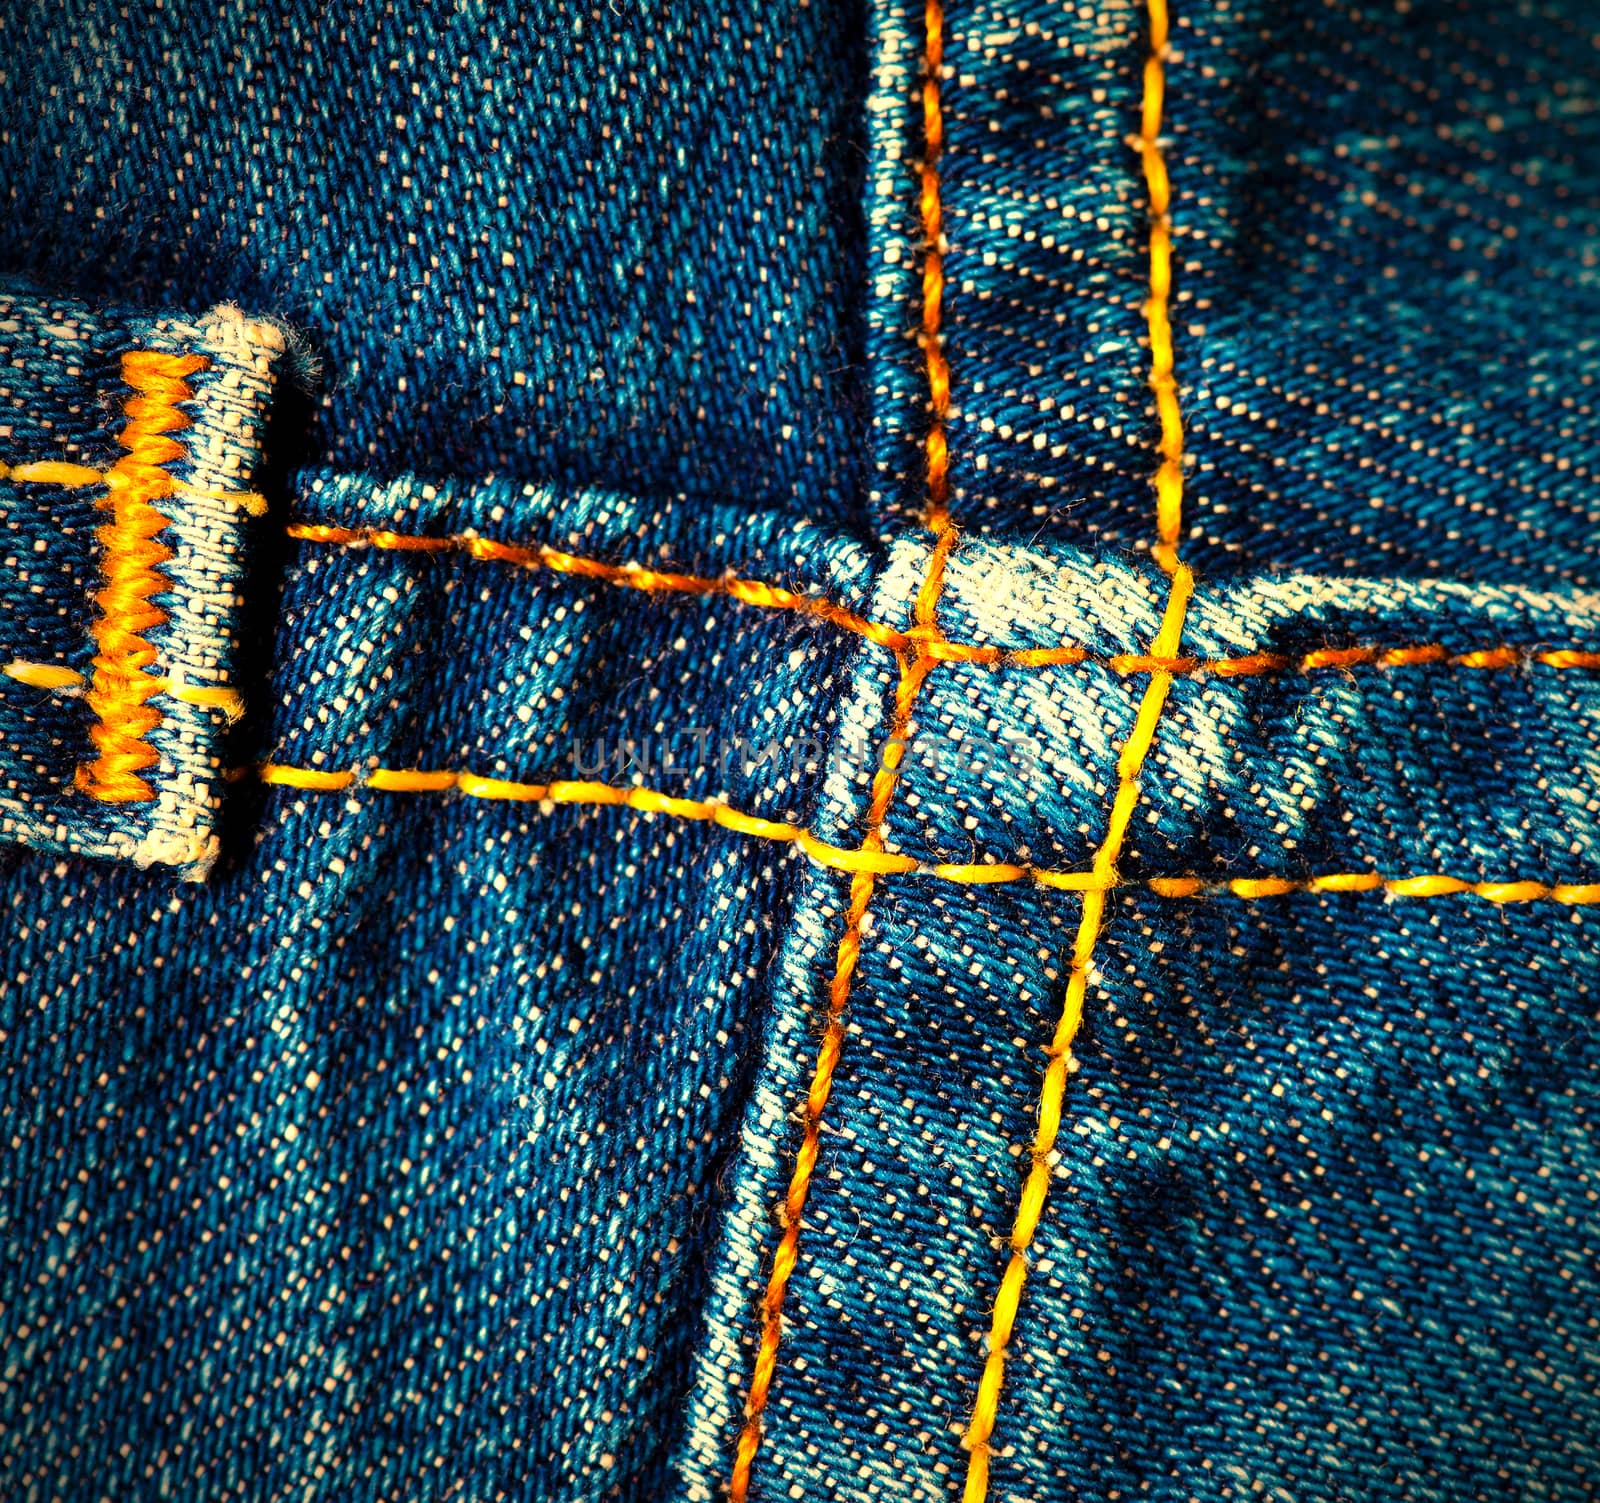 Crossed seams on jeans, close-up. instagram image retro style